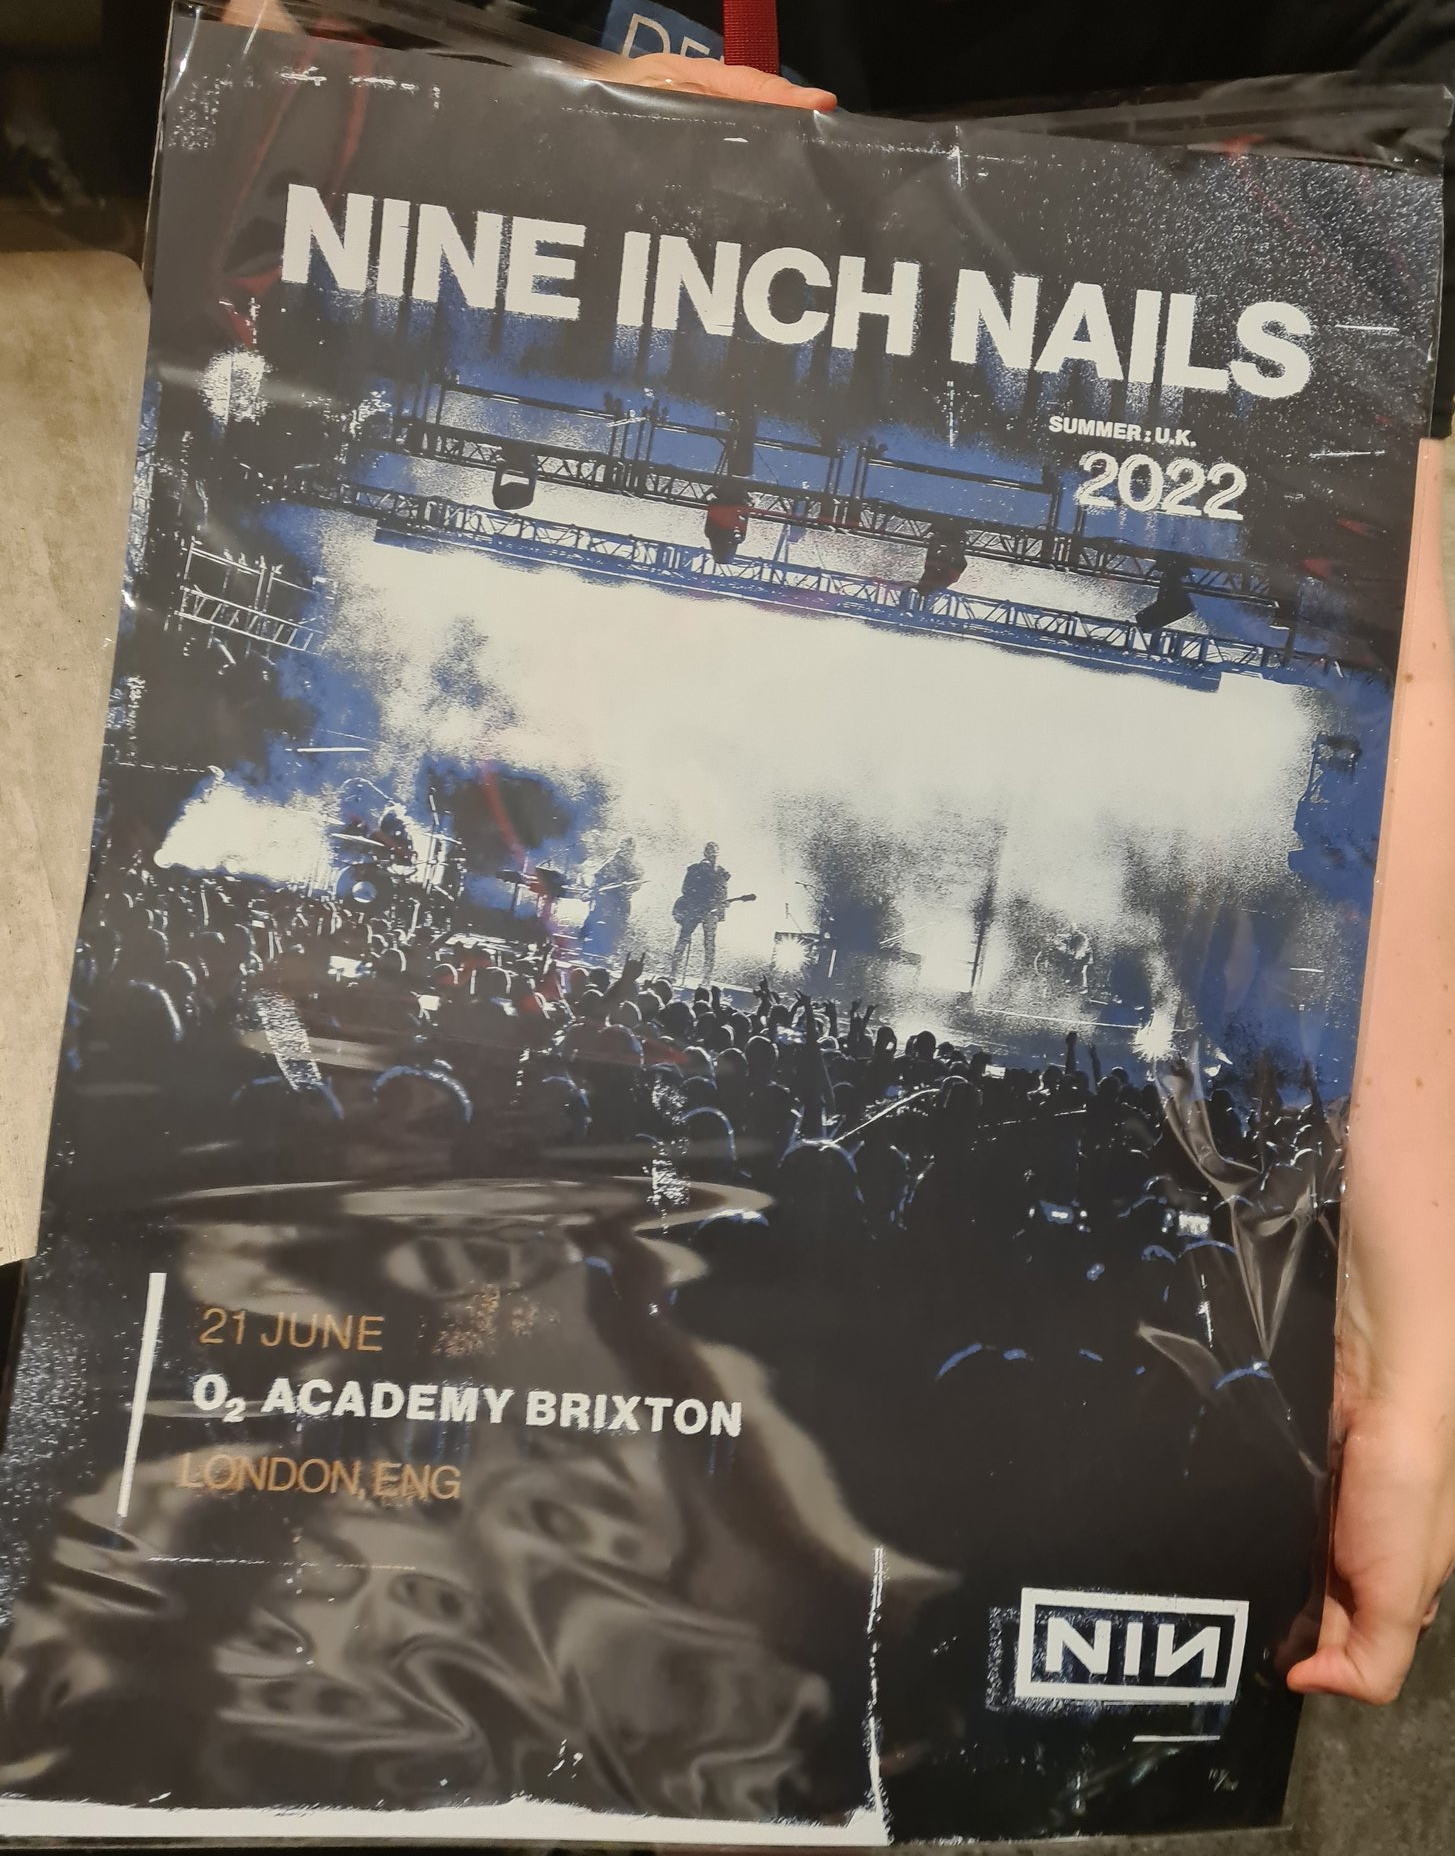 <a href='https://www.ebay.com/sch/i.html?_from=R40&_trksid=p2323012.m570.l1313&_nkw=Nine+Inch+Nails+Poster+London&_sacat=0&mkcid=1&mkrid=711-53200-19255-0&siteid=0&campid=5336302525&customid=poster&toolid=10001&mkevt=1'>Buy this Poster!</a>